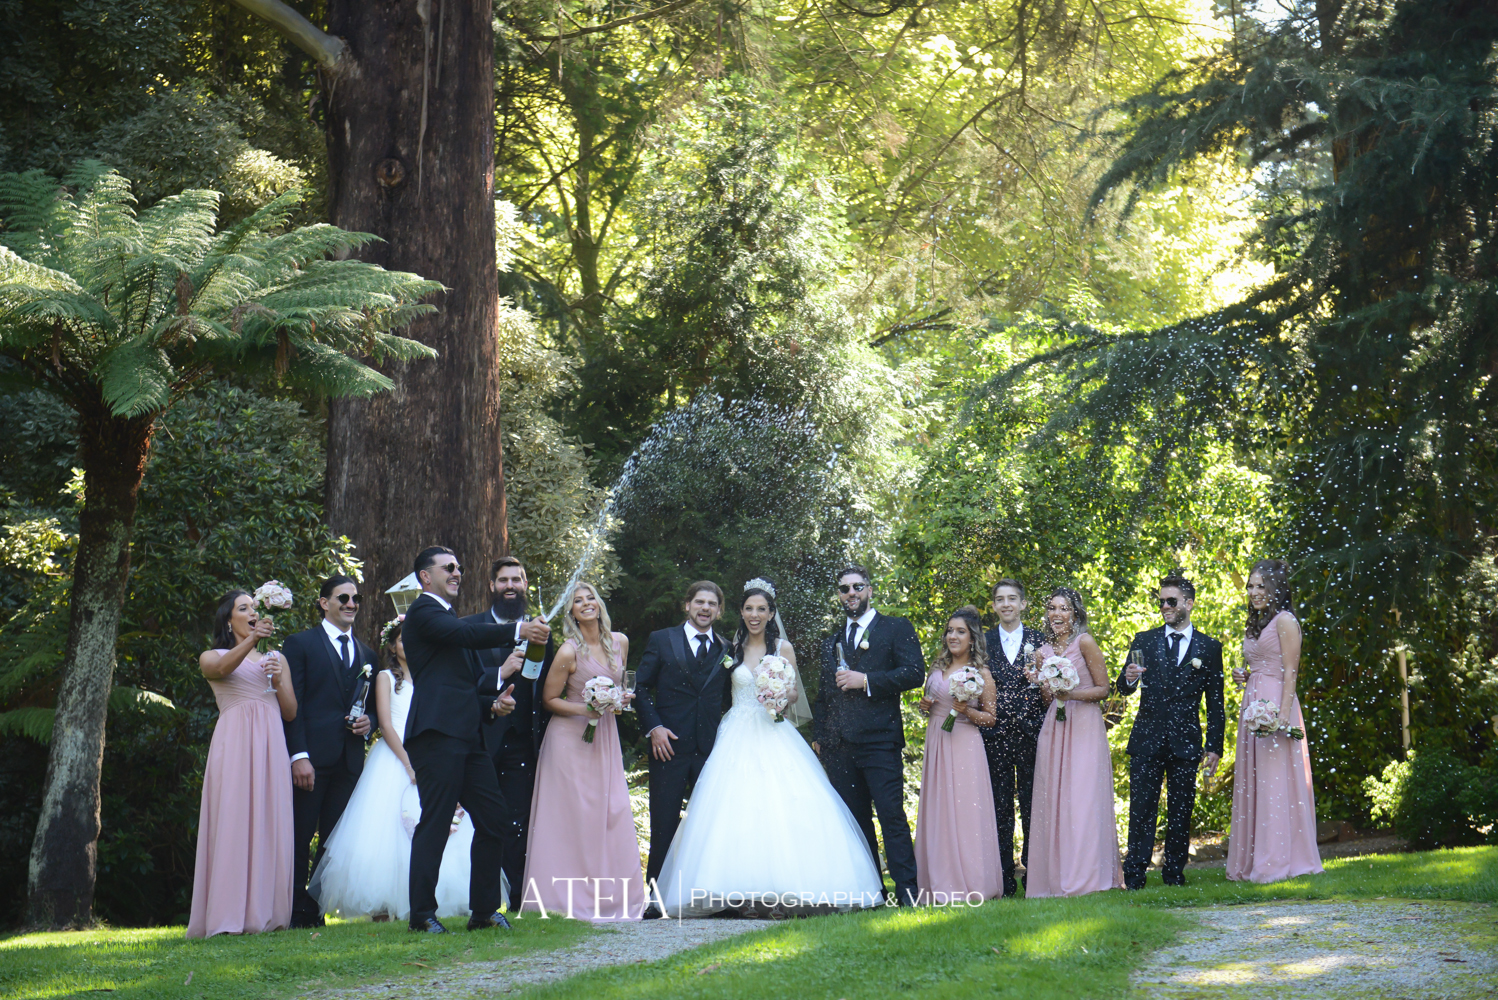 , Tatra Receptions Wedding Photography Mount Dandenong by ATEIA Photography &#038; Video